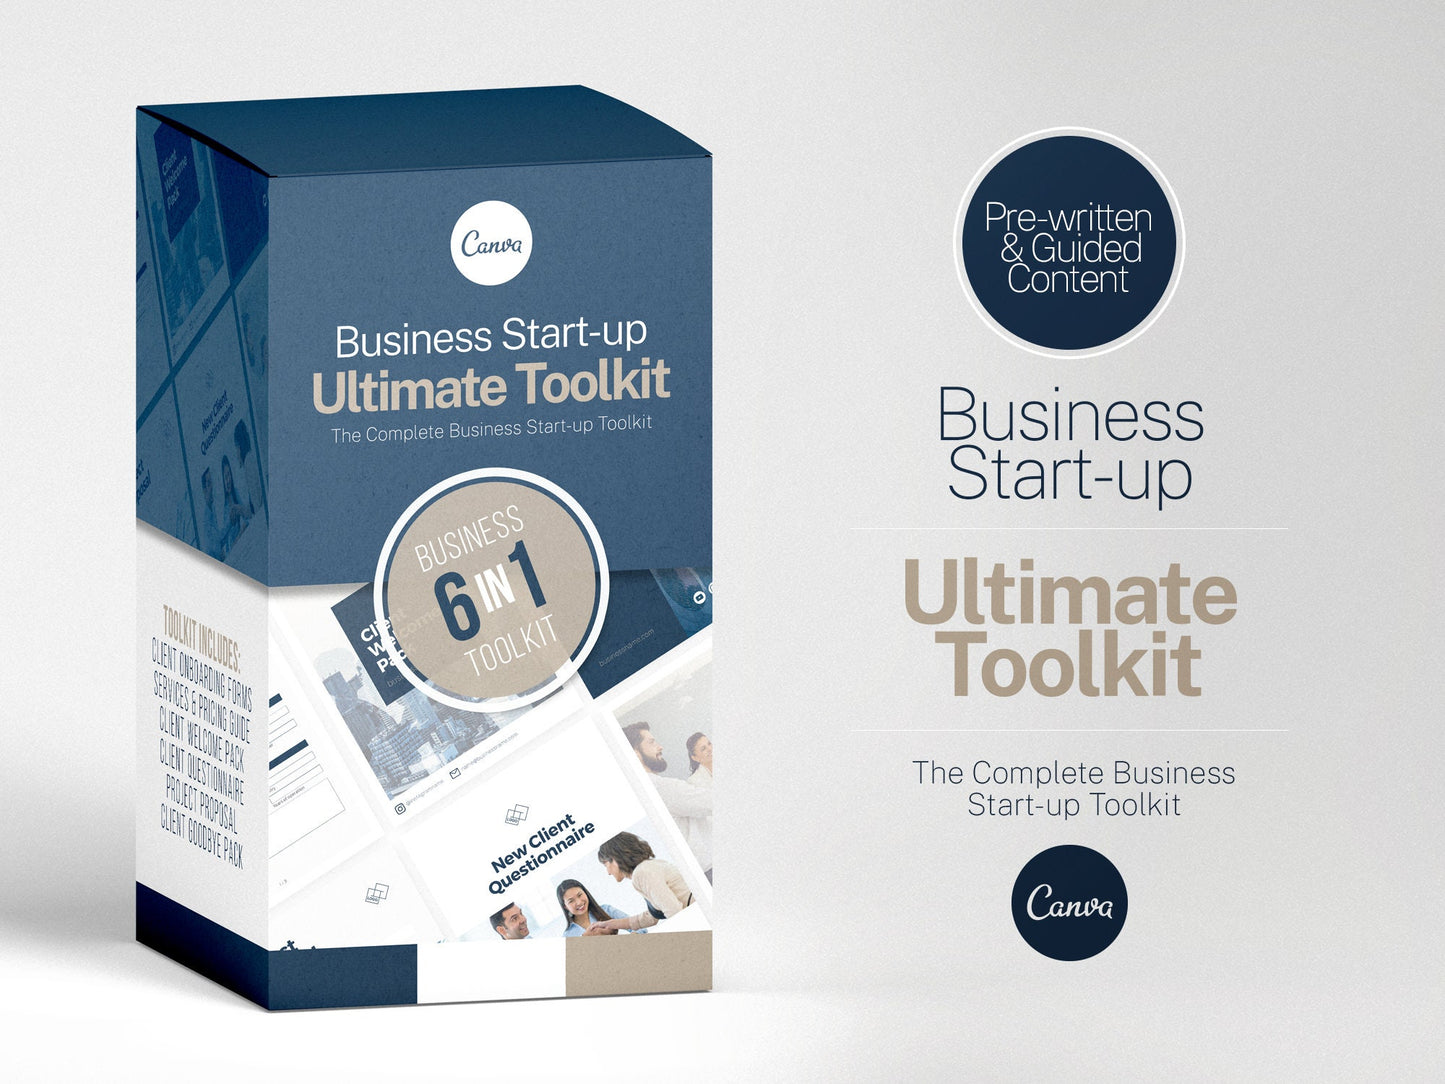 Business Start-Up Ultimate Toolkit (Steel)